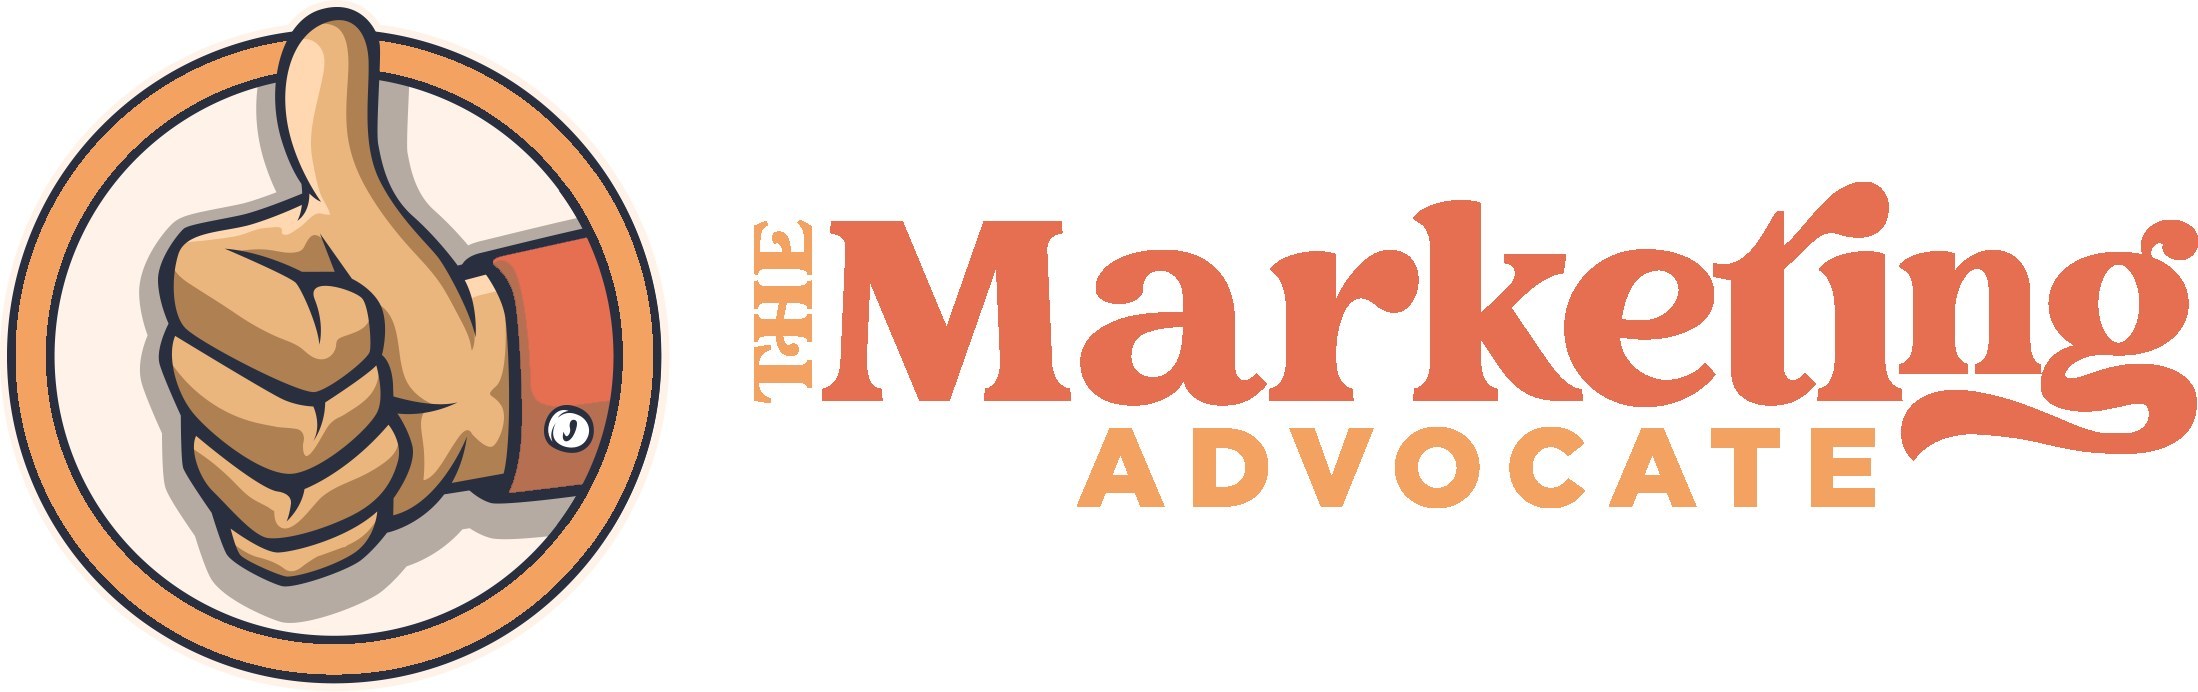 TheMarketingAdvocate.com Announces Rebrand, Launches New Email Newsletter For Middle-Aged Business Owners